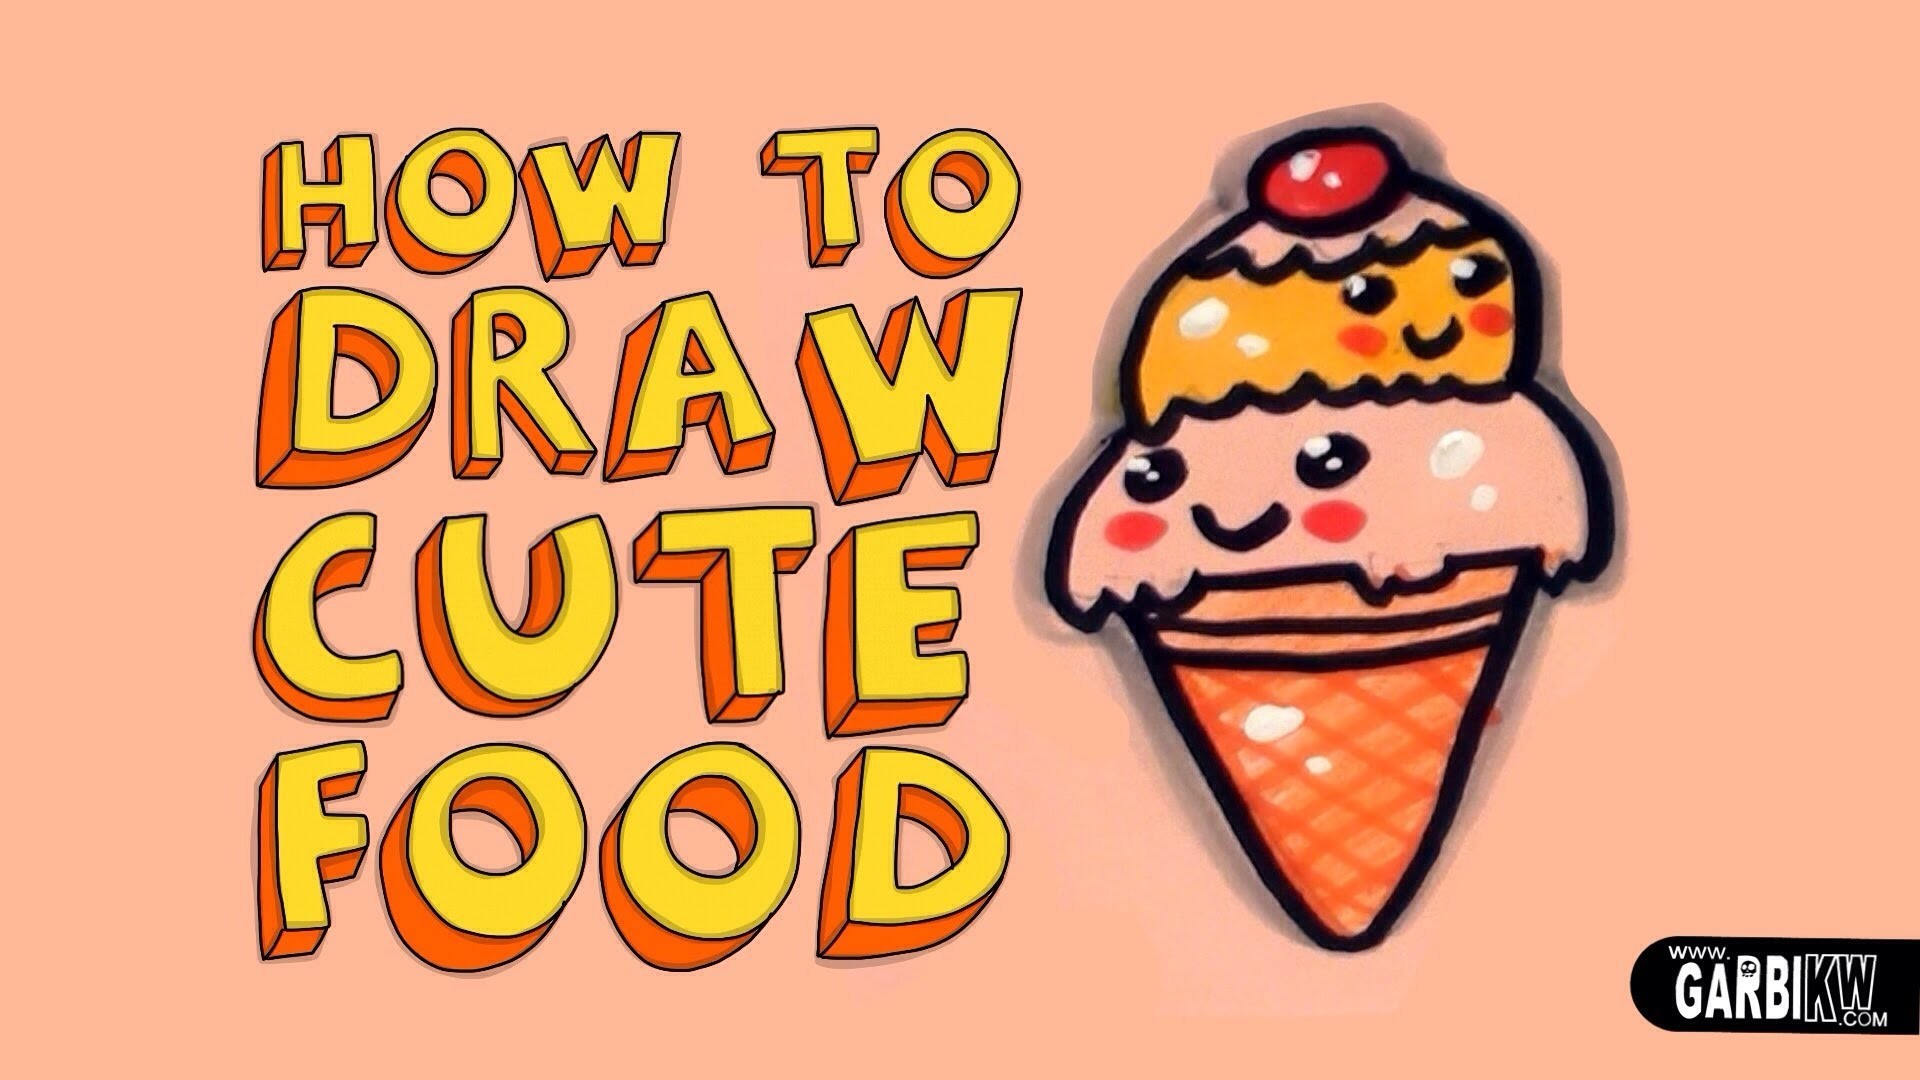 1920x1080 How To Draw a Cute Ice Cream - Kawaii Food - Easy Drawings by Garbi KW -  YouTube